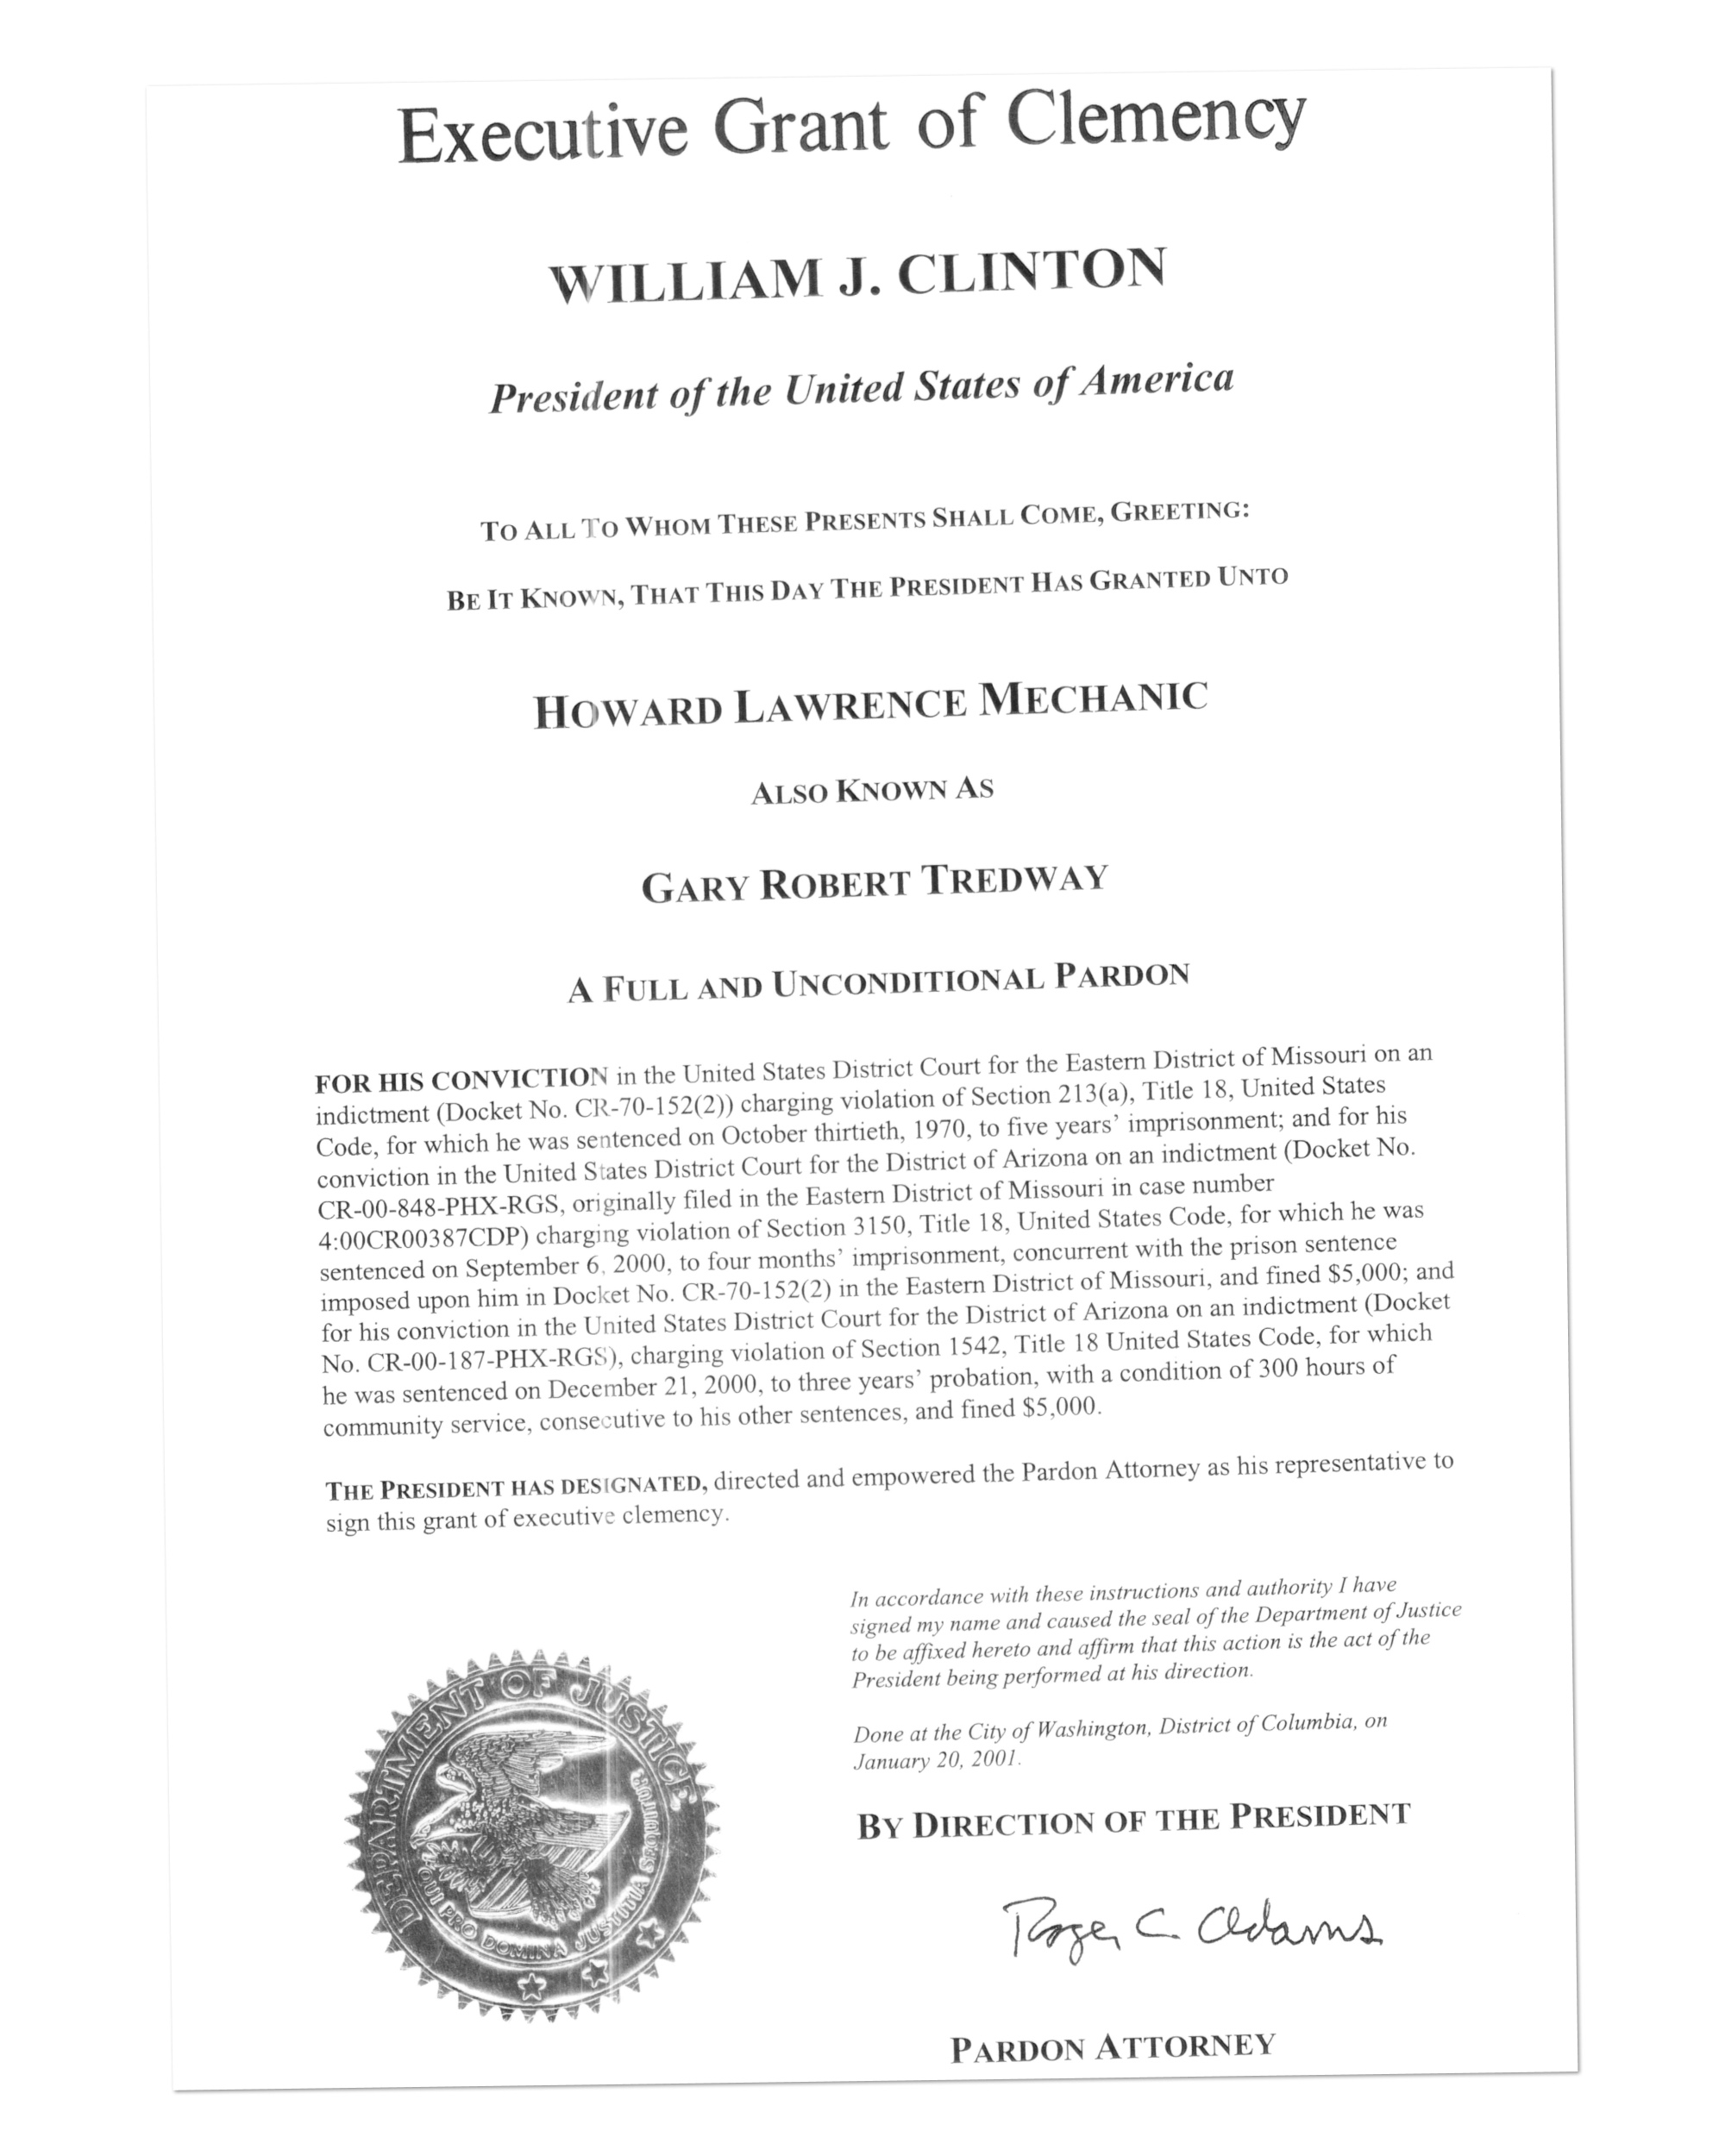 The official pardon from President Clinton. Image courtesy of Howard Mechanic.